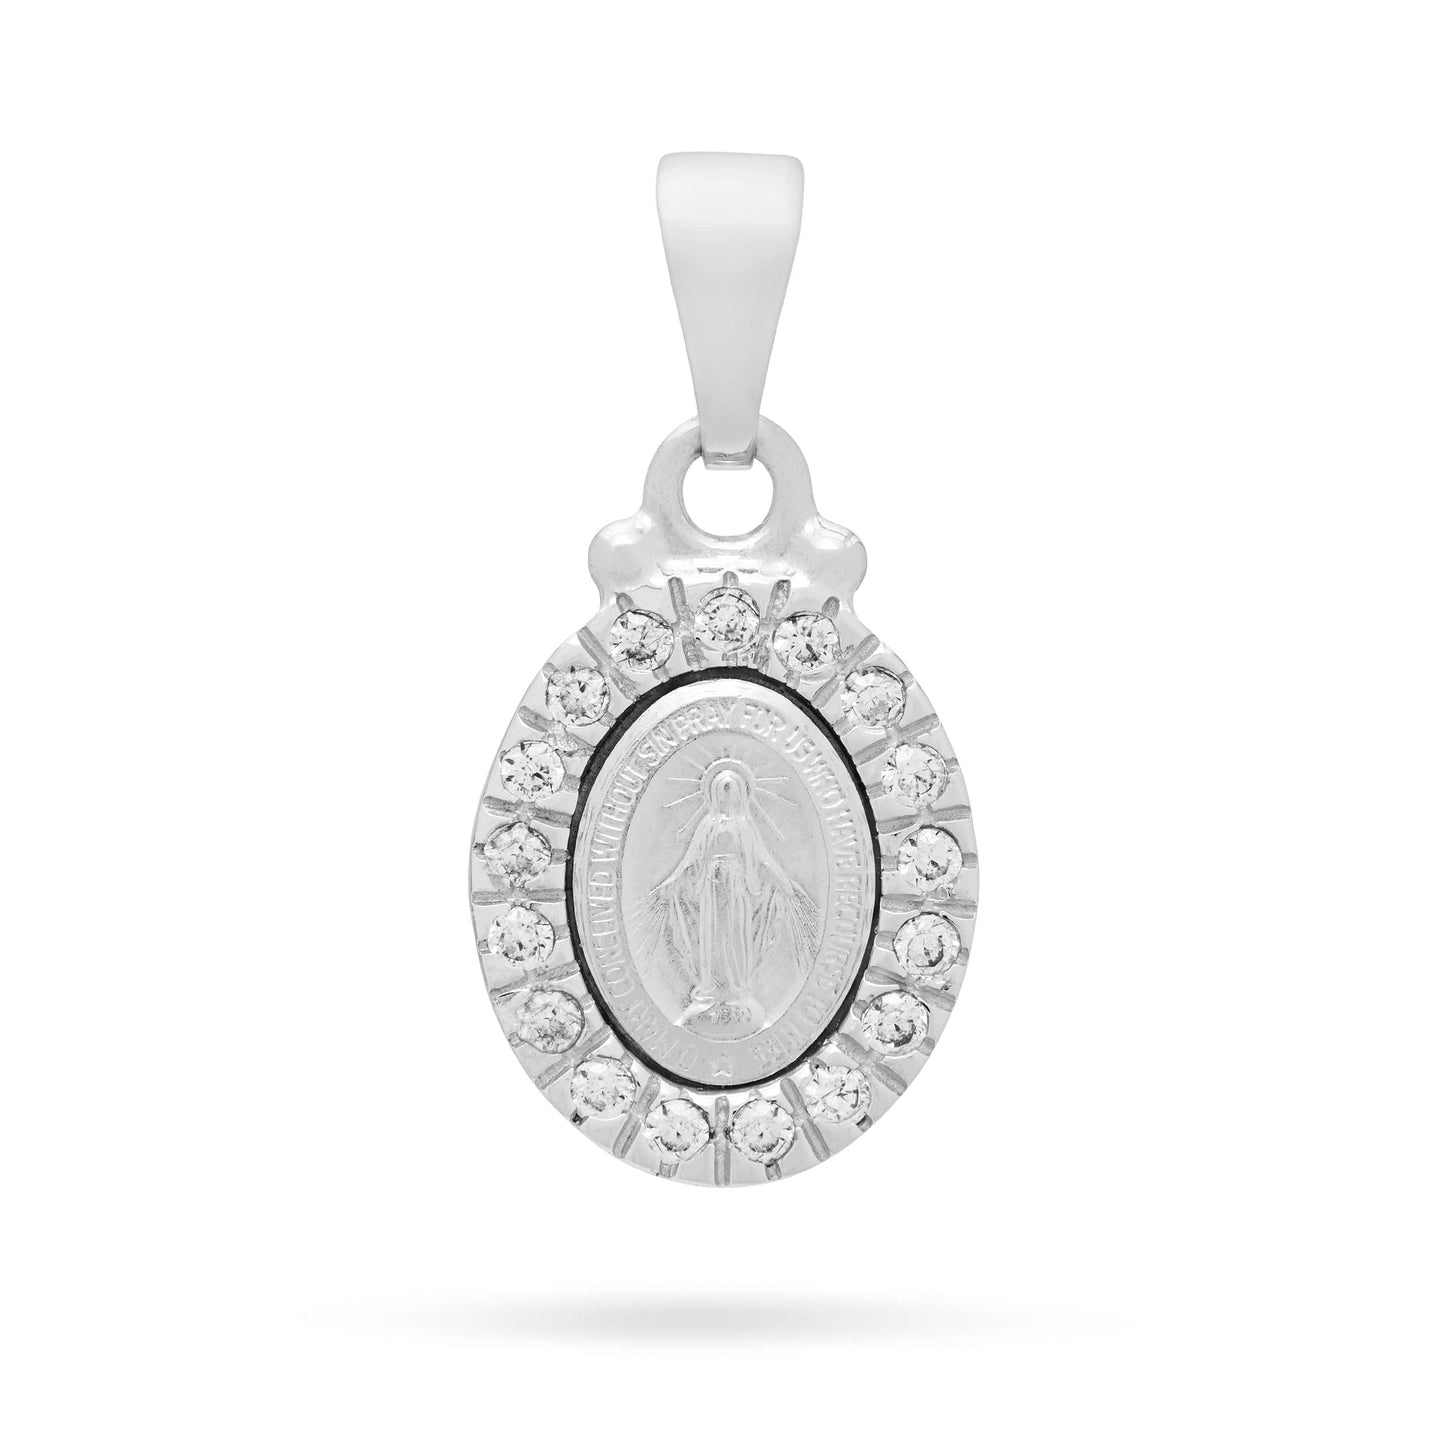 MONDO CATTOLICO Jewelry 11 mm (0.43 in) Pendant of Miraculous Mary White Gold